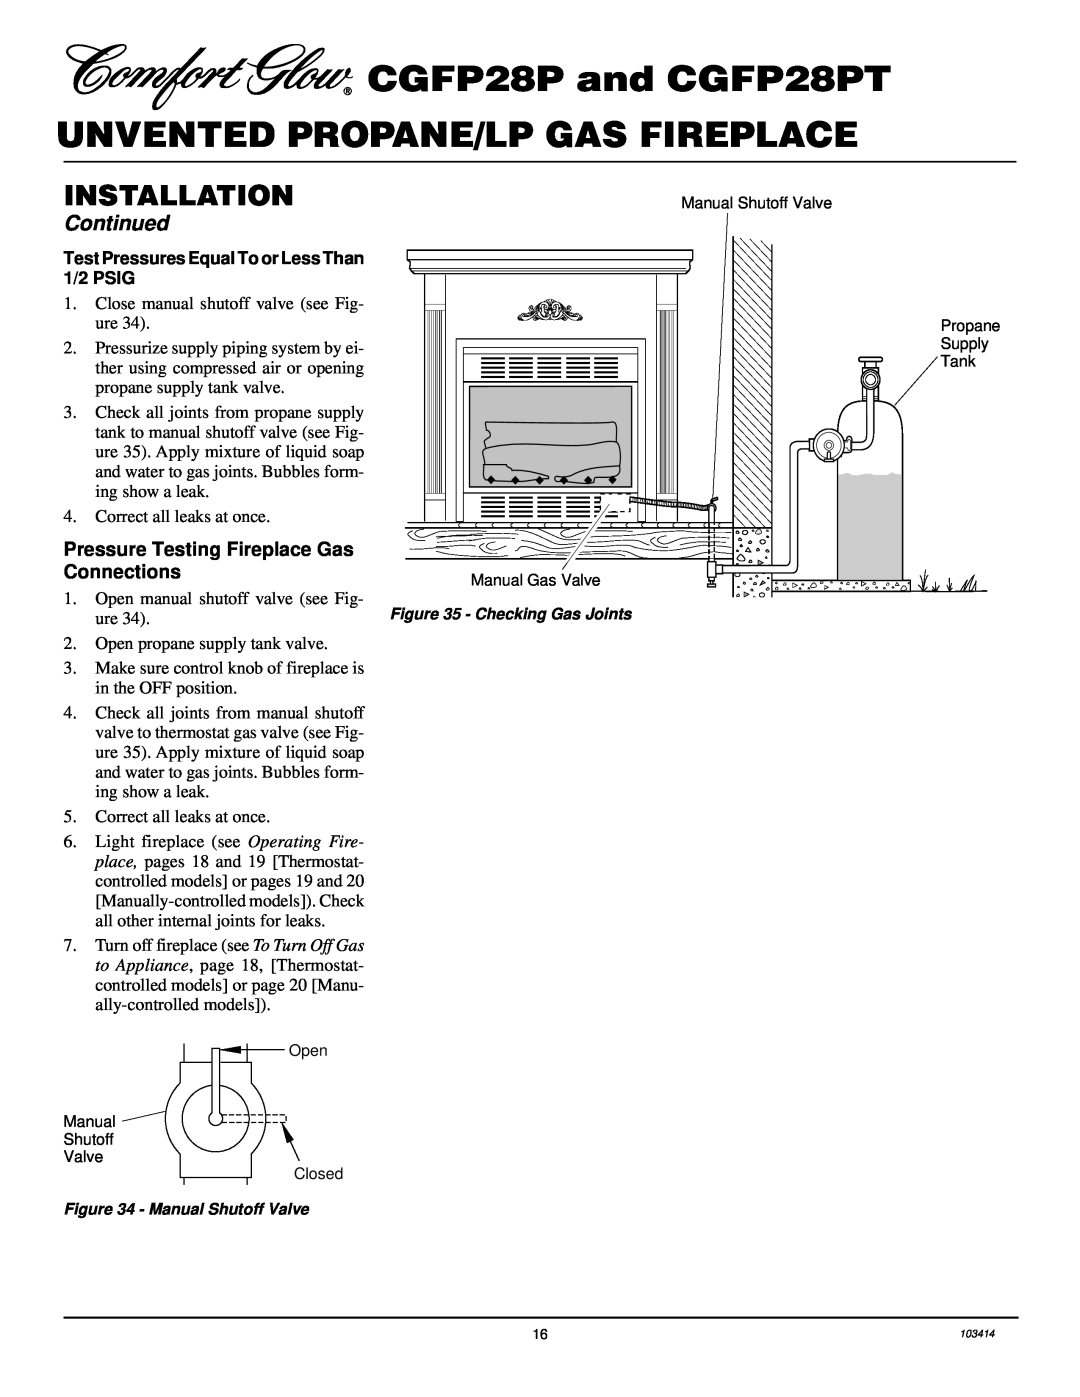 Desa installation manual CGFP28P and CGFP28PT, Unvented Propane/Lp Gas Fireplace, Installation, Continued 